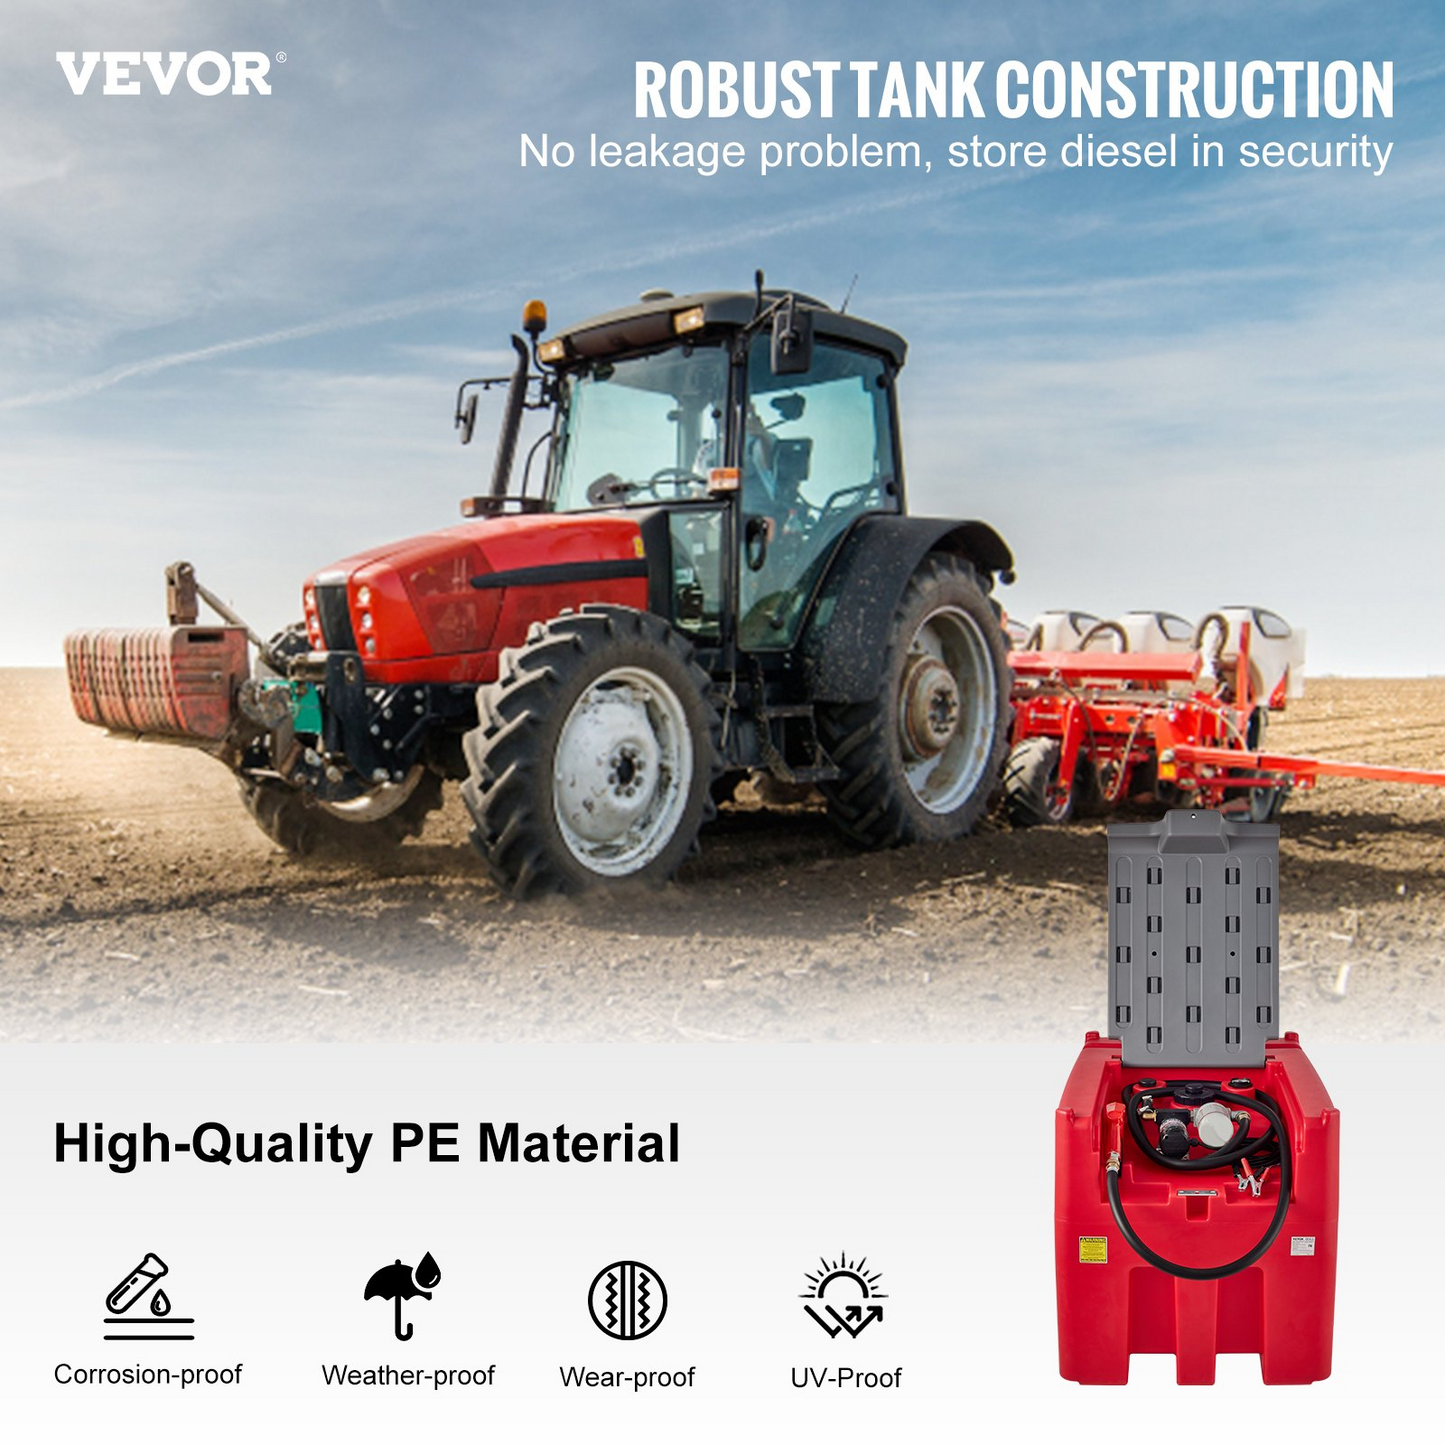 VEVOR Portable Diesel Tank, 116 Gallon Capacity & 10 GPM Flow Rate, Diesel Fuel Tank with 12V Electric Transfer Pump and 13.1ft Rubber Hose, PE Diesel Transfer Tank for Easy Fuel Transportation, Red, Goodies N Stuff